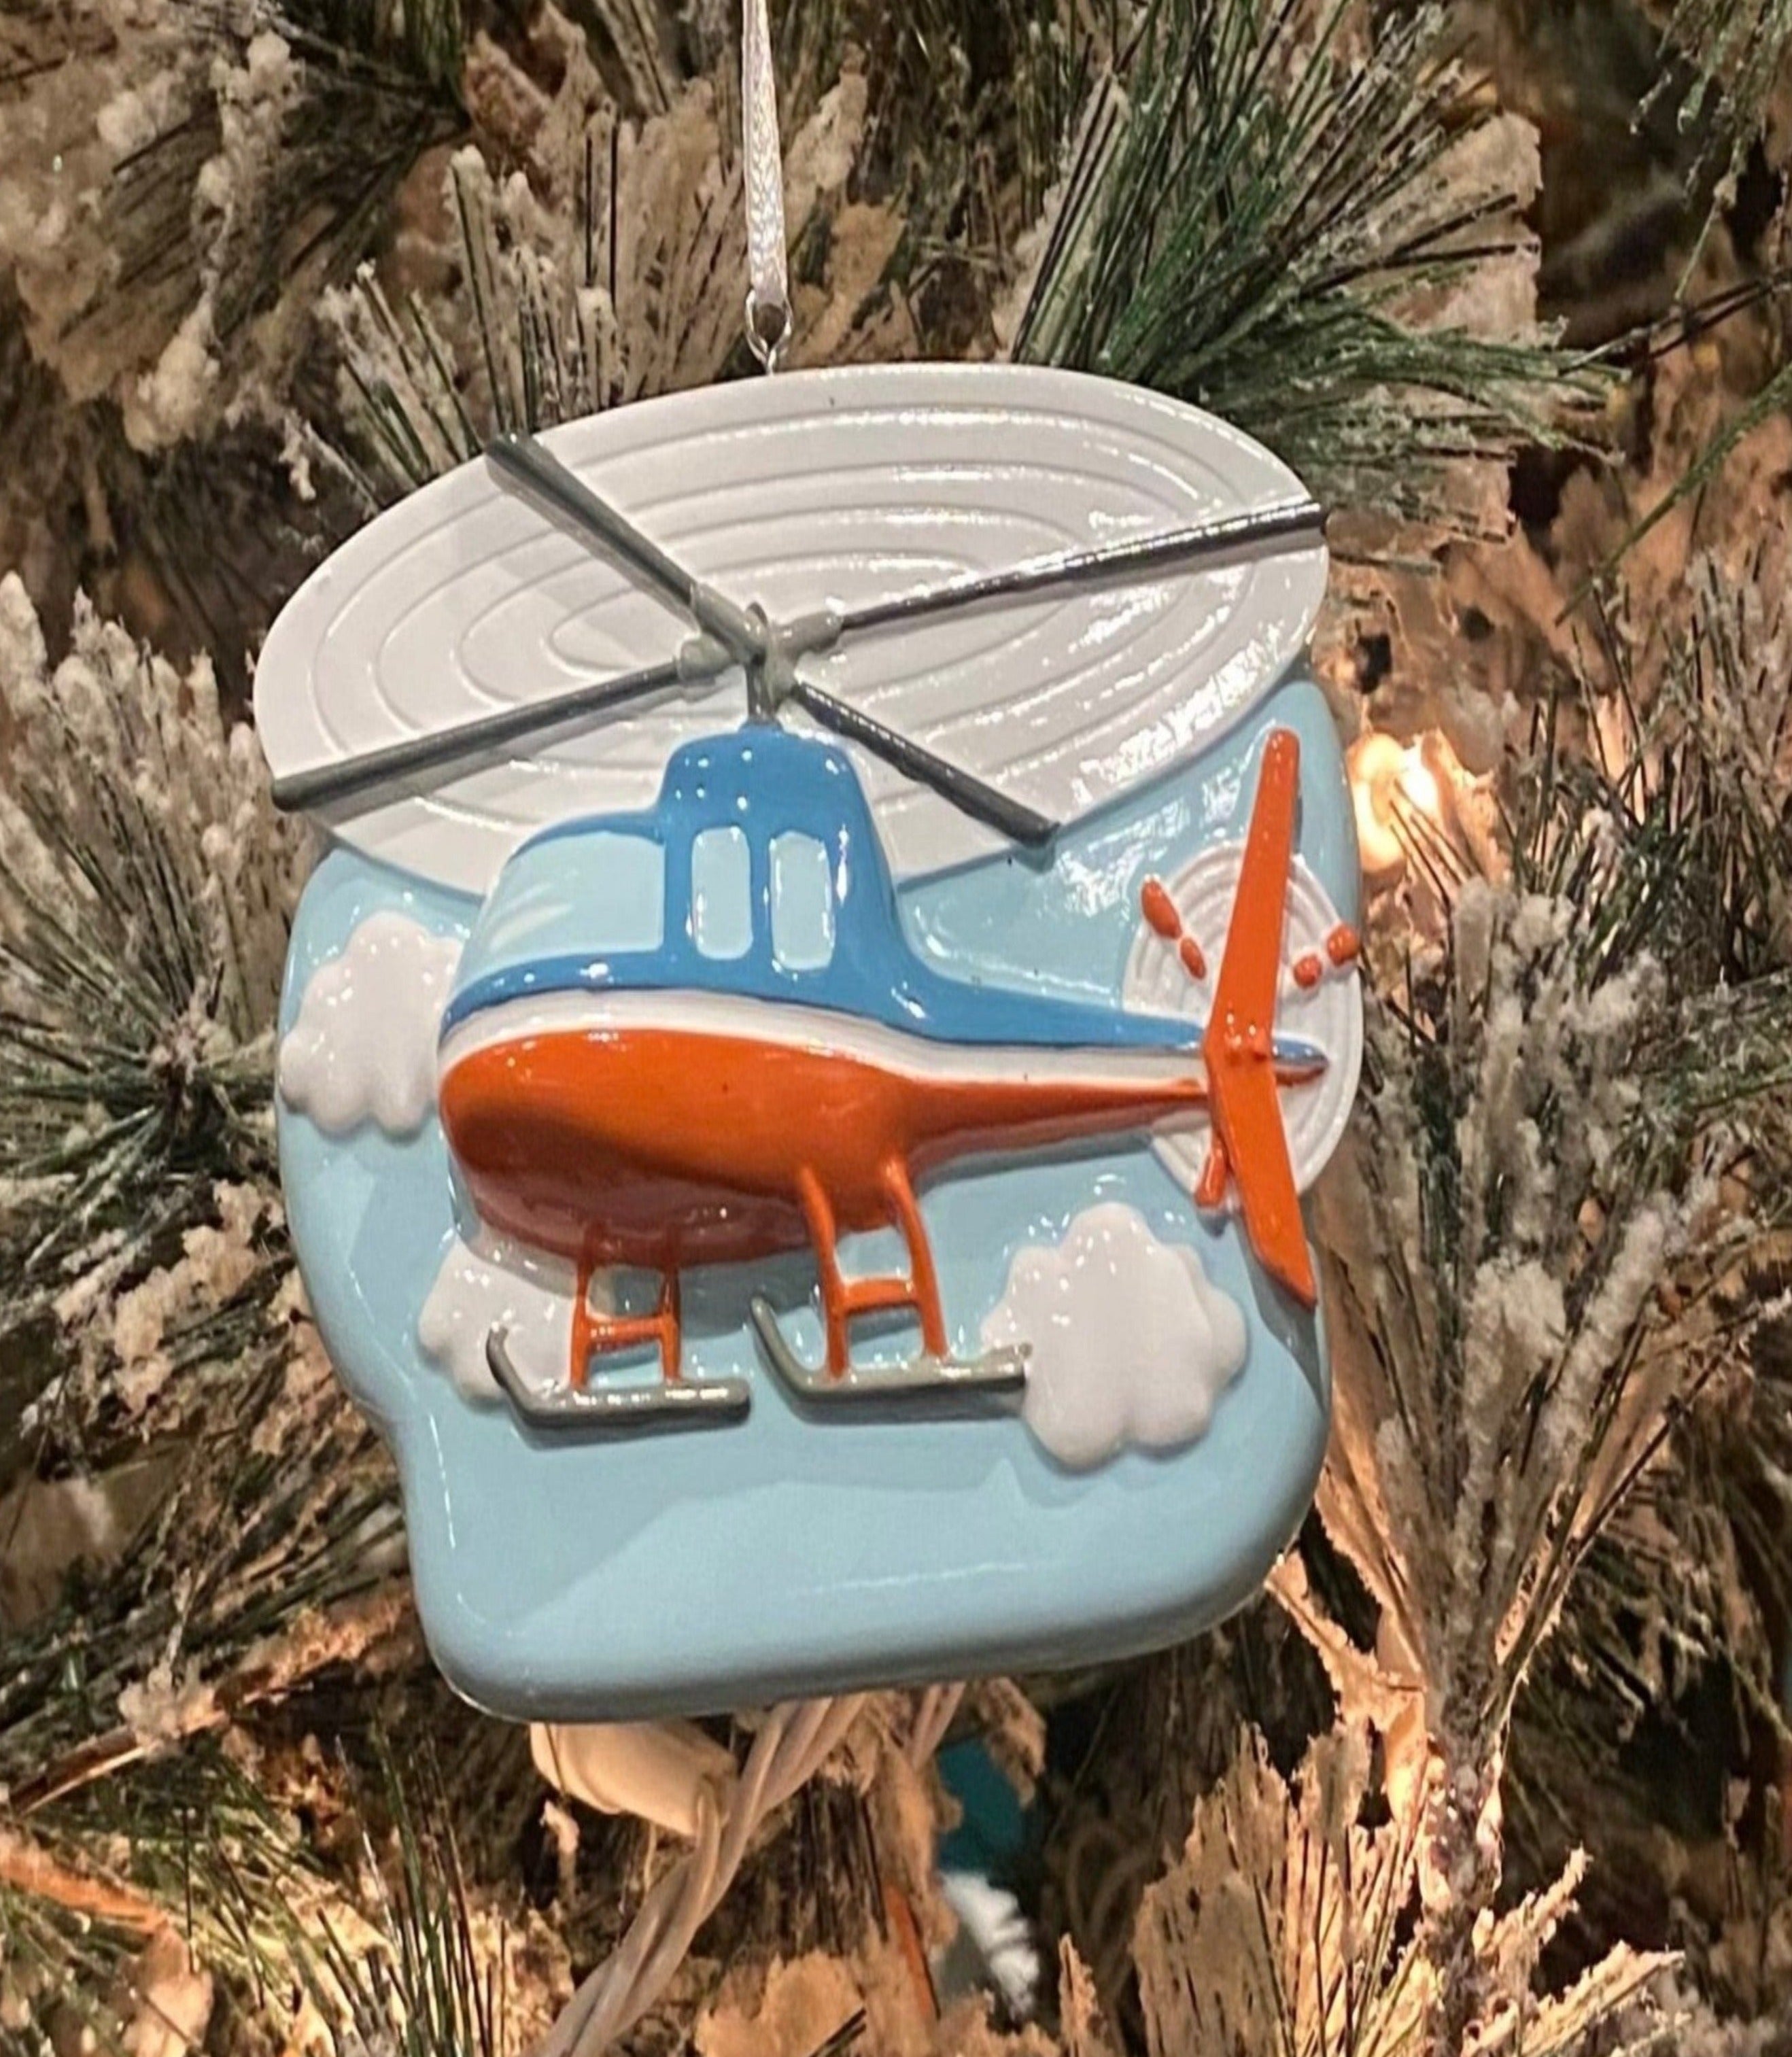 Child Helicopter Personalized Ornament